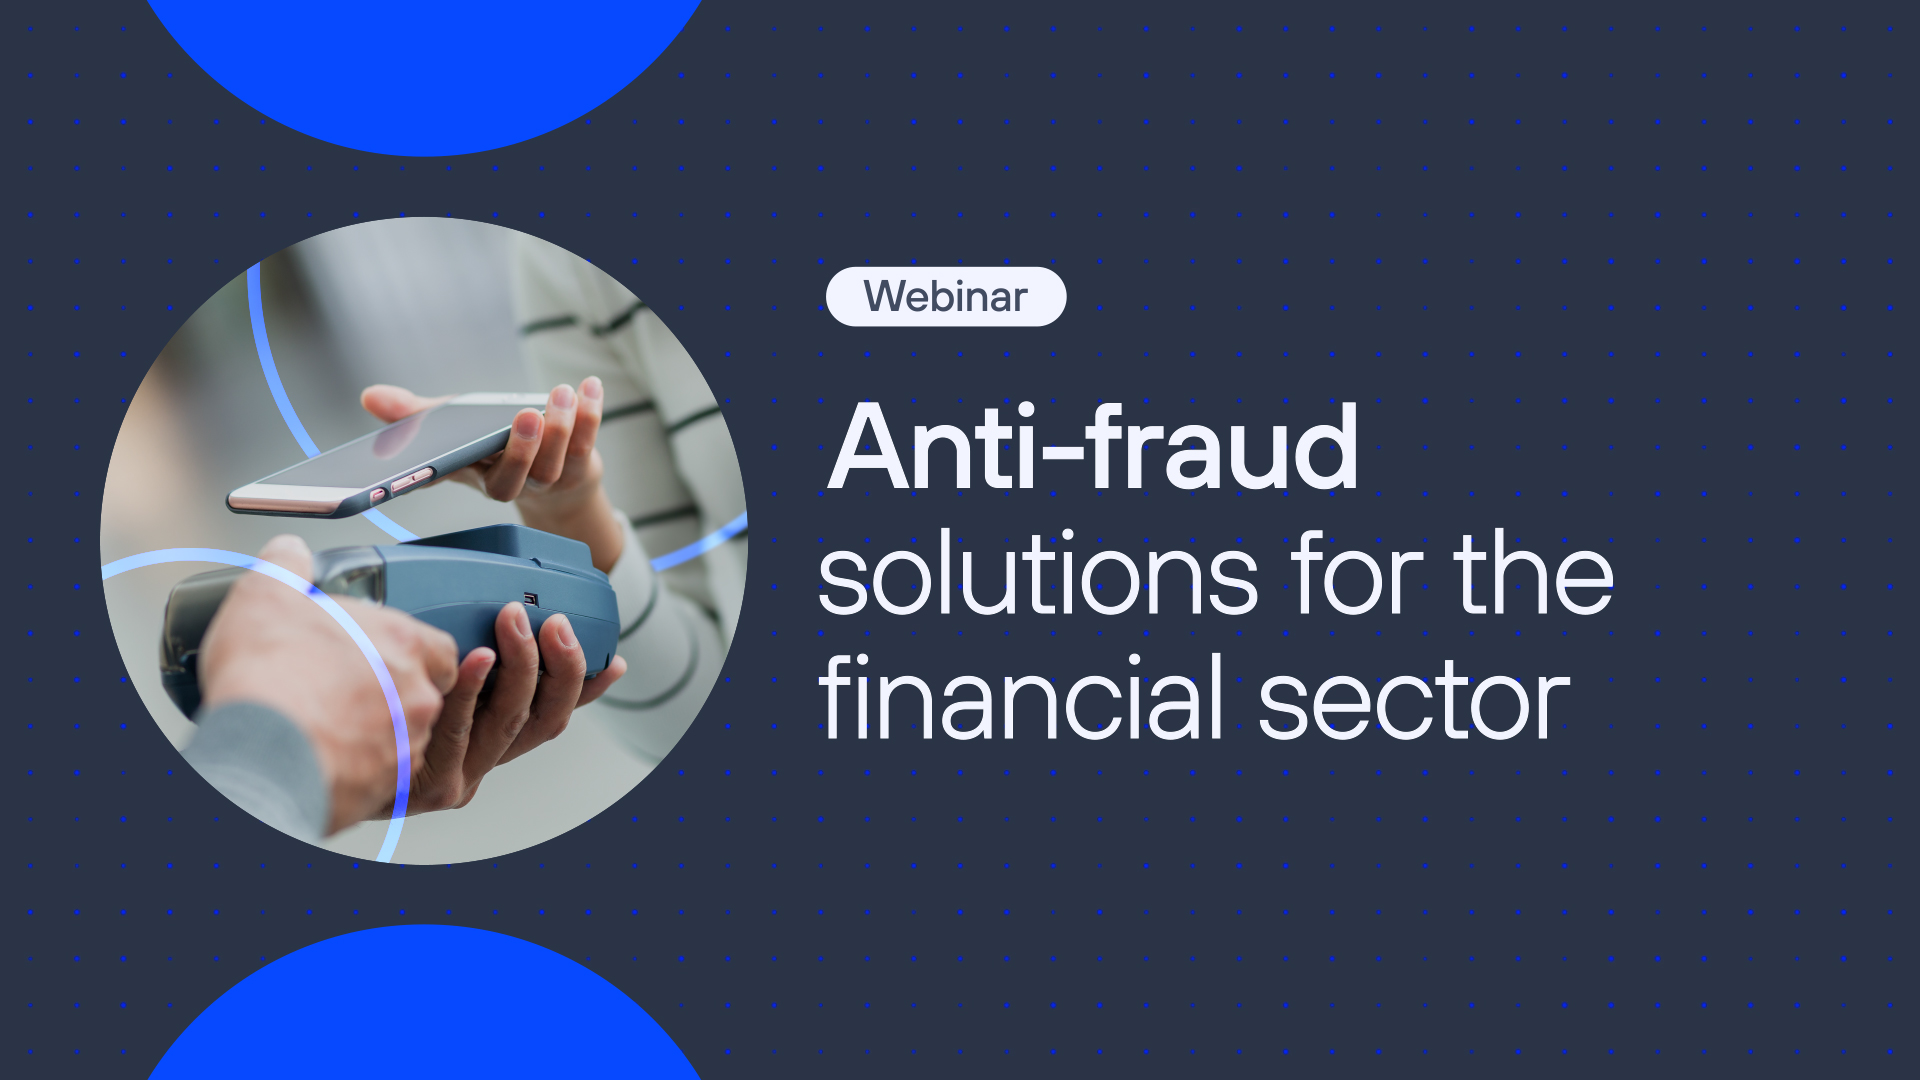 Anti-fraud solutions for the financial sector.